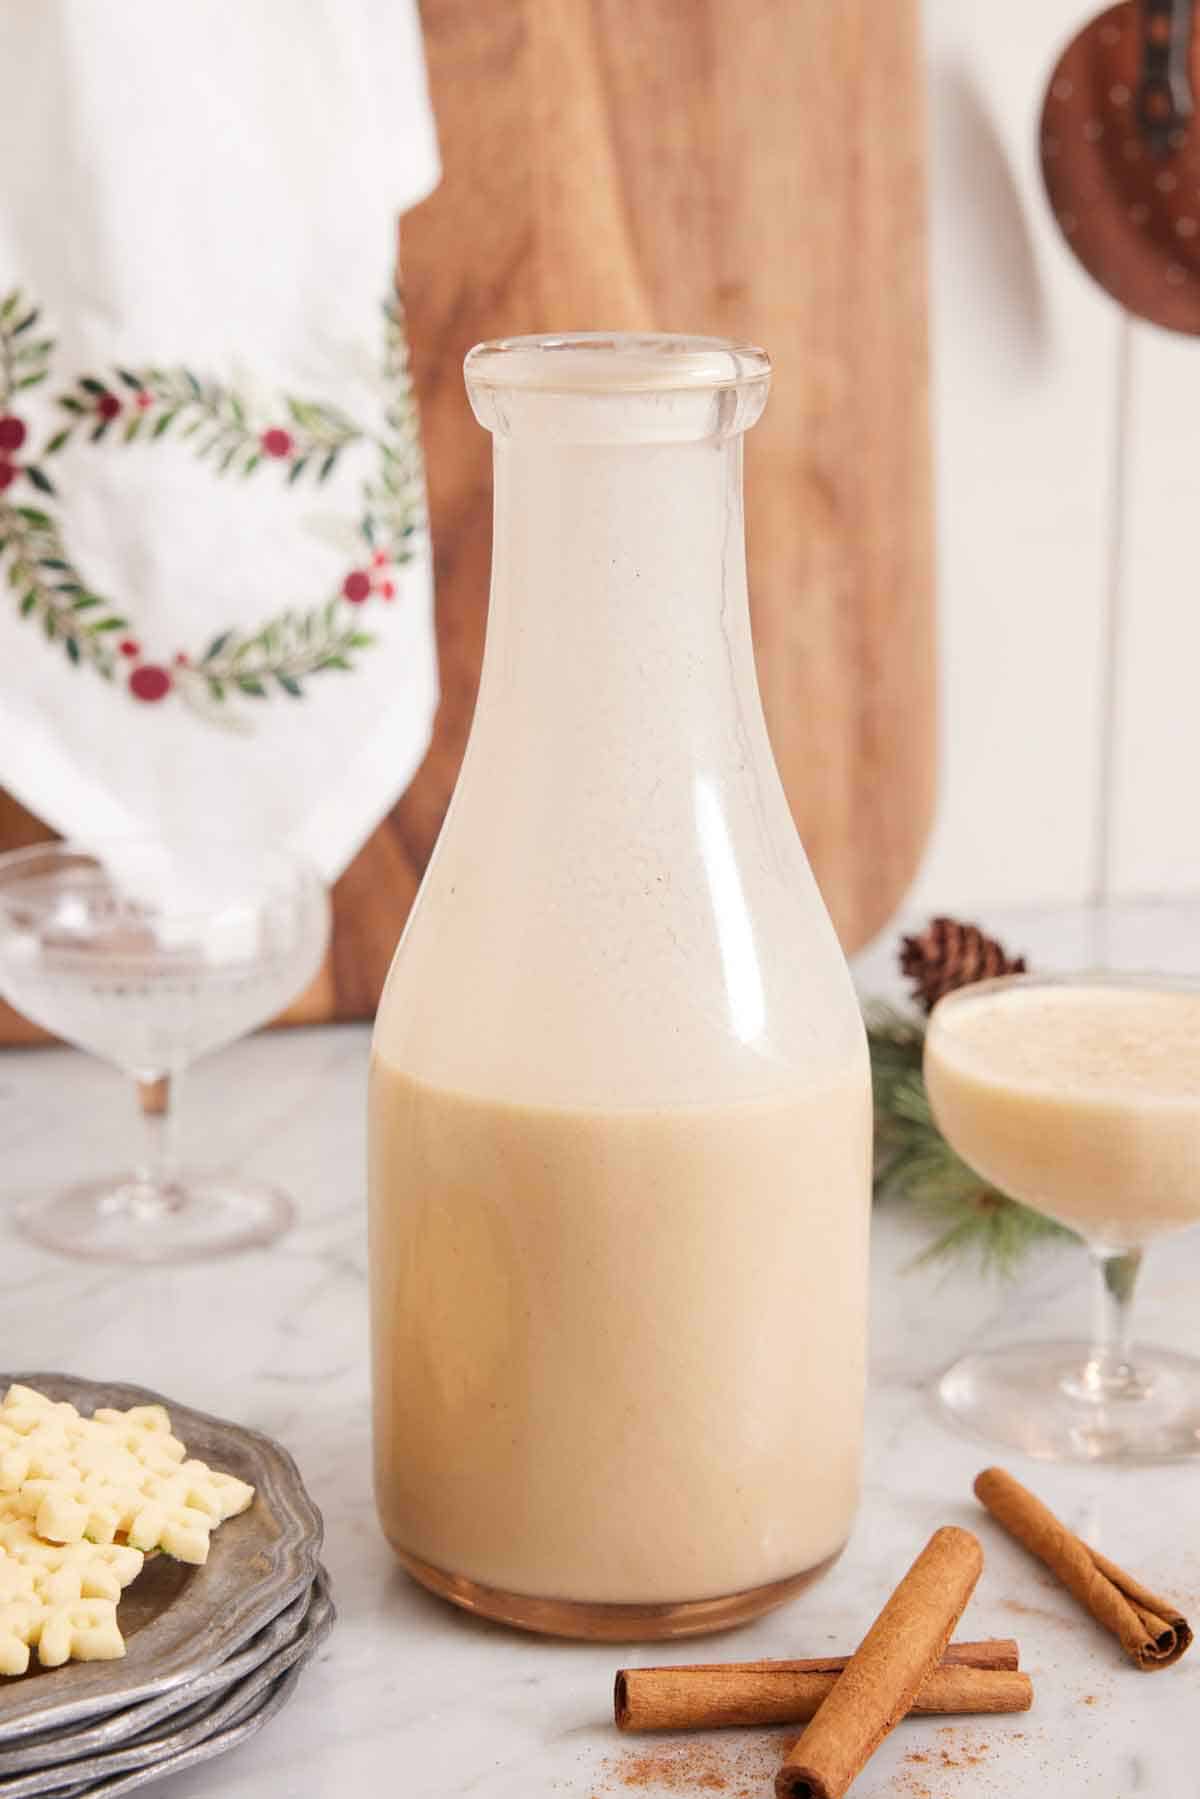 A bottle of eggnog with a full glass off to the side and empty glass in the back.